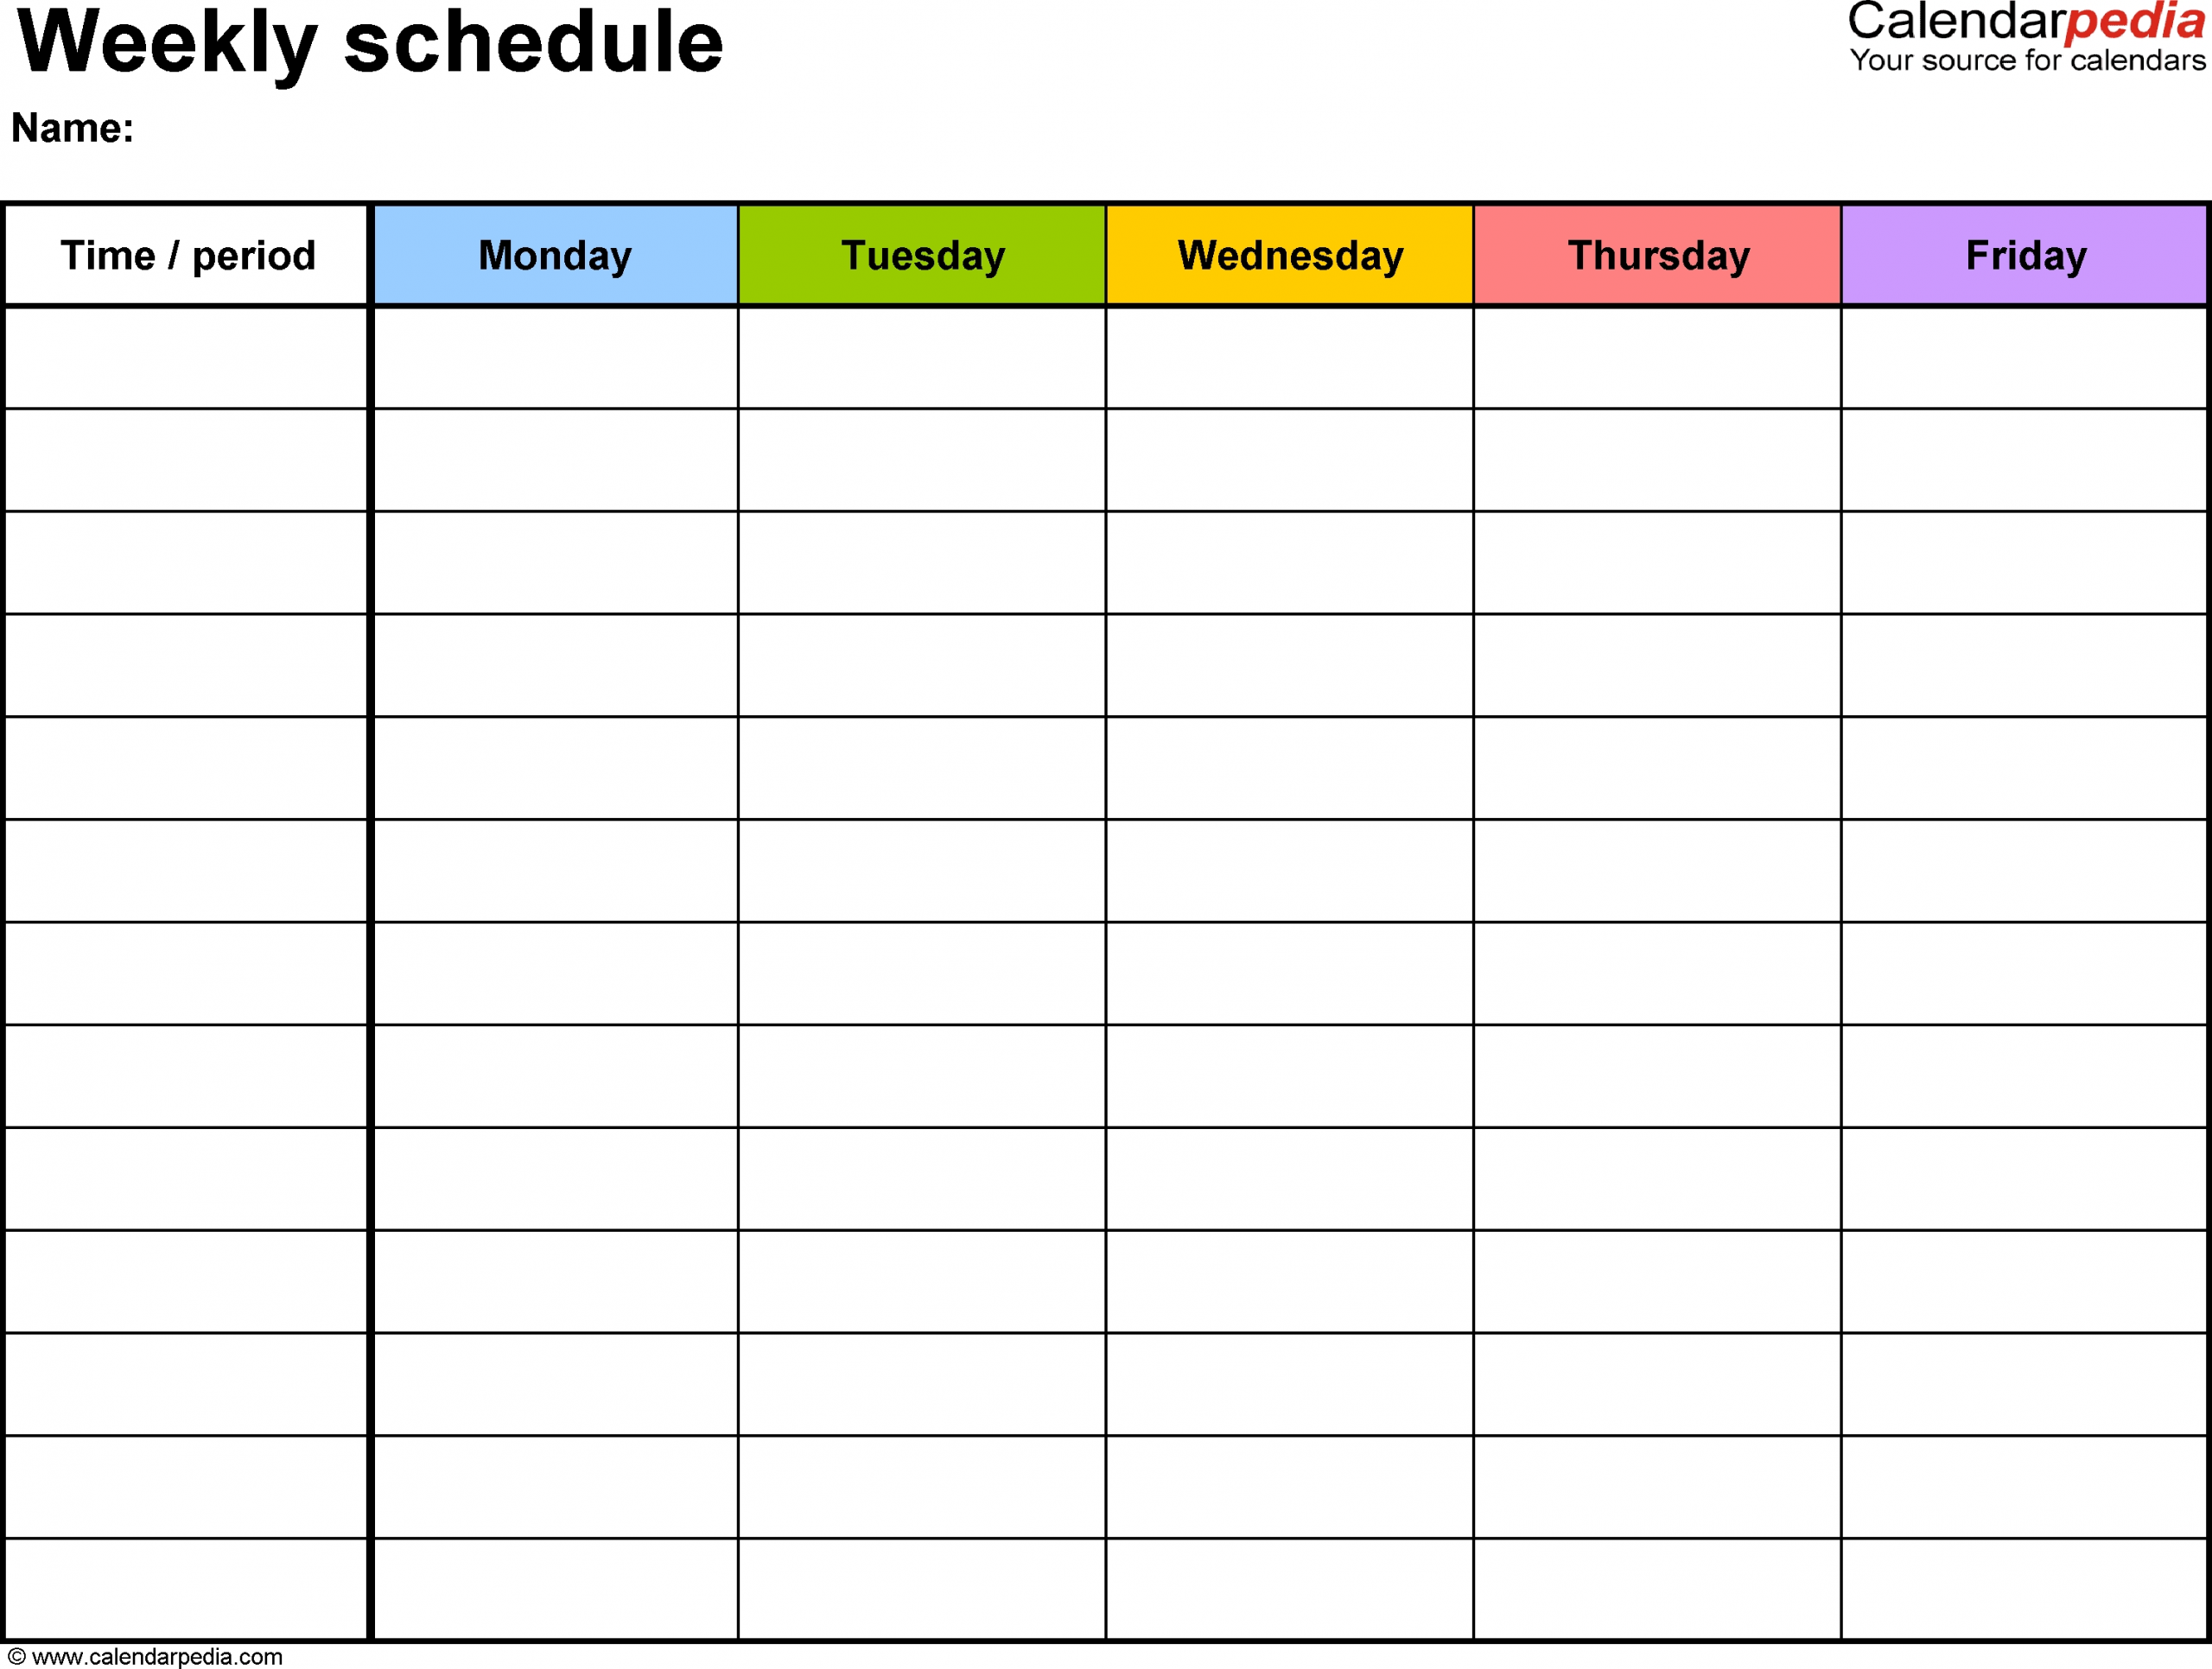 Free Weekly Schedule Templates For Word - 18 Templates inside Week Template Monday Through Friday